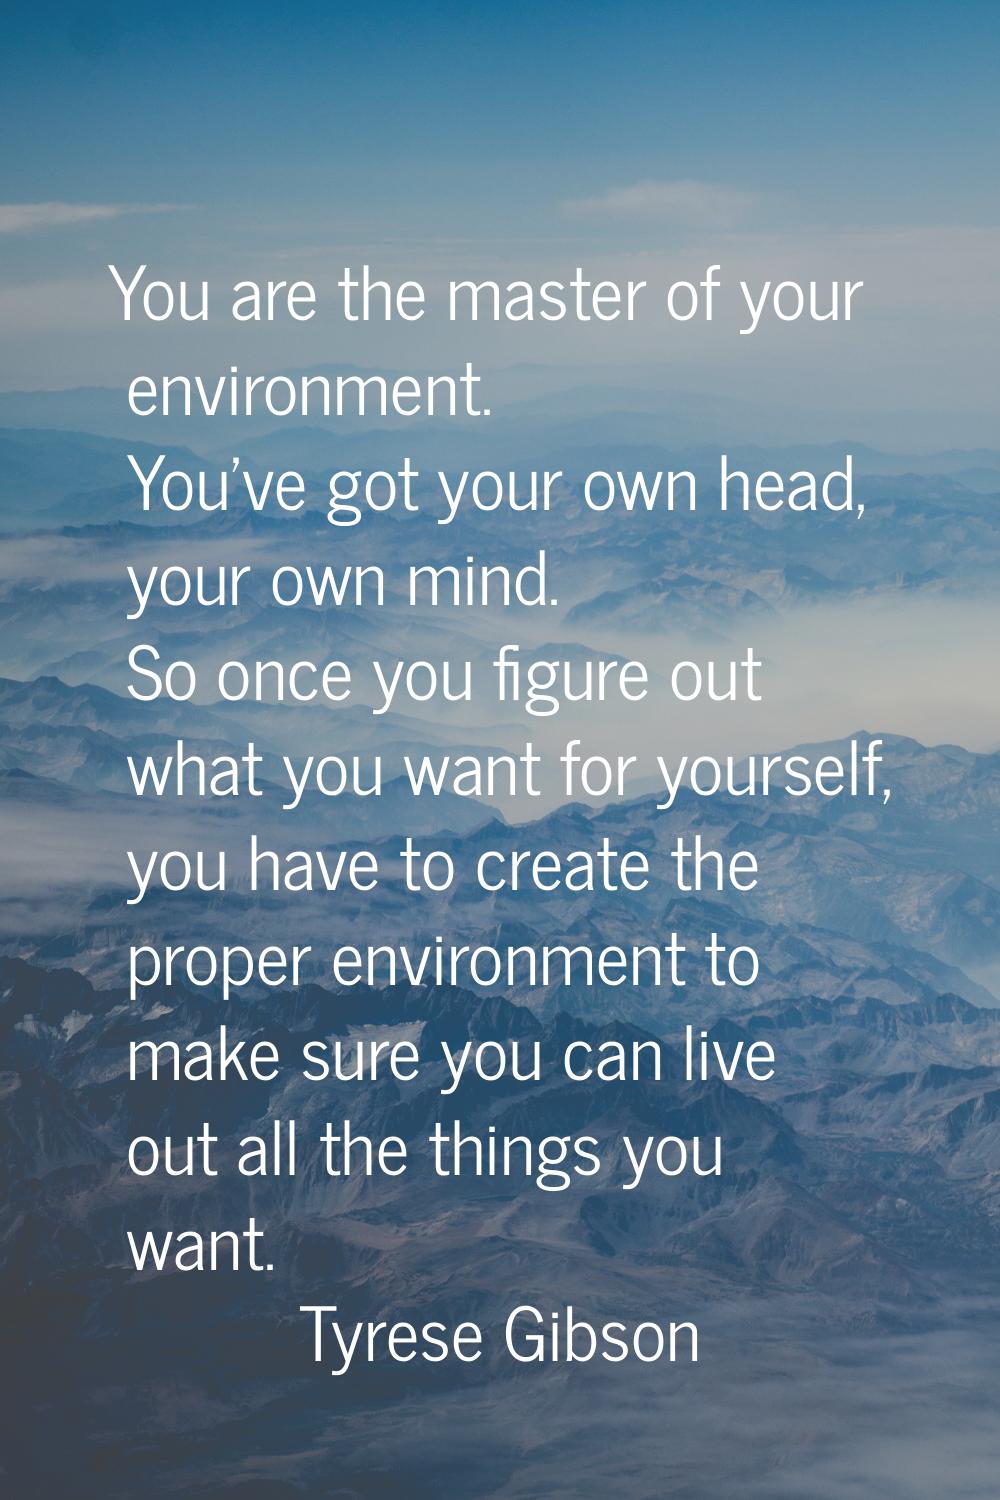 You are the master of your environment. You've got your own head, your own mind. So once you figure